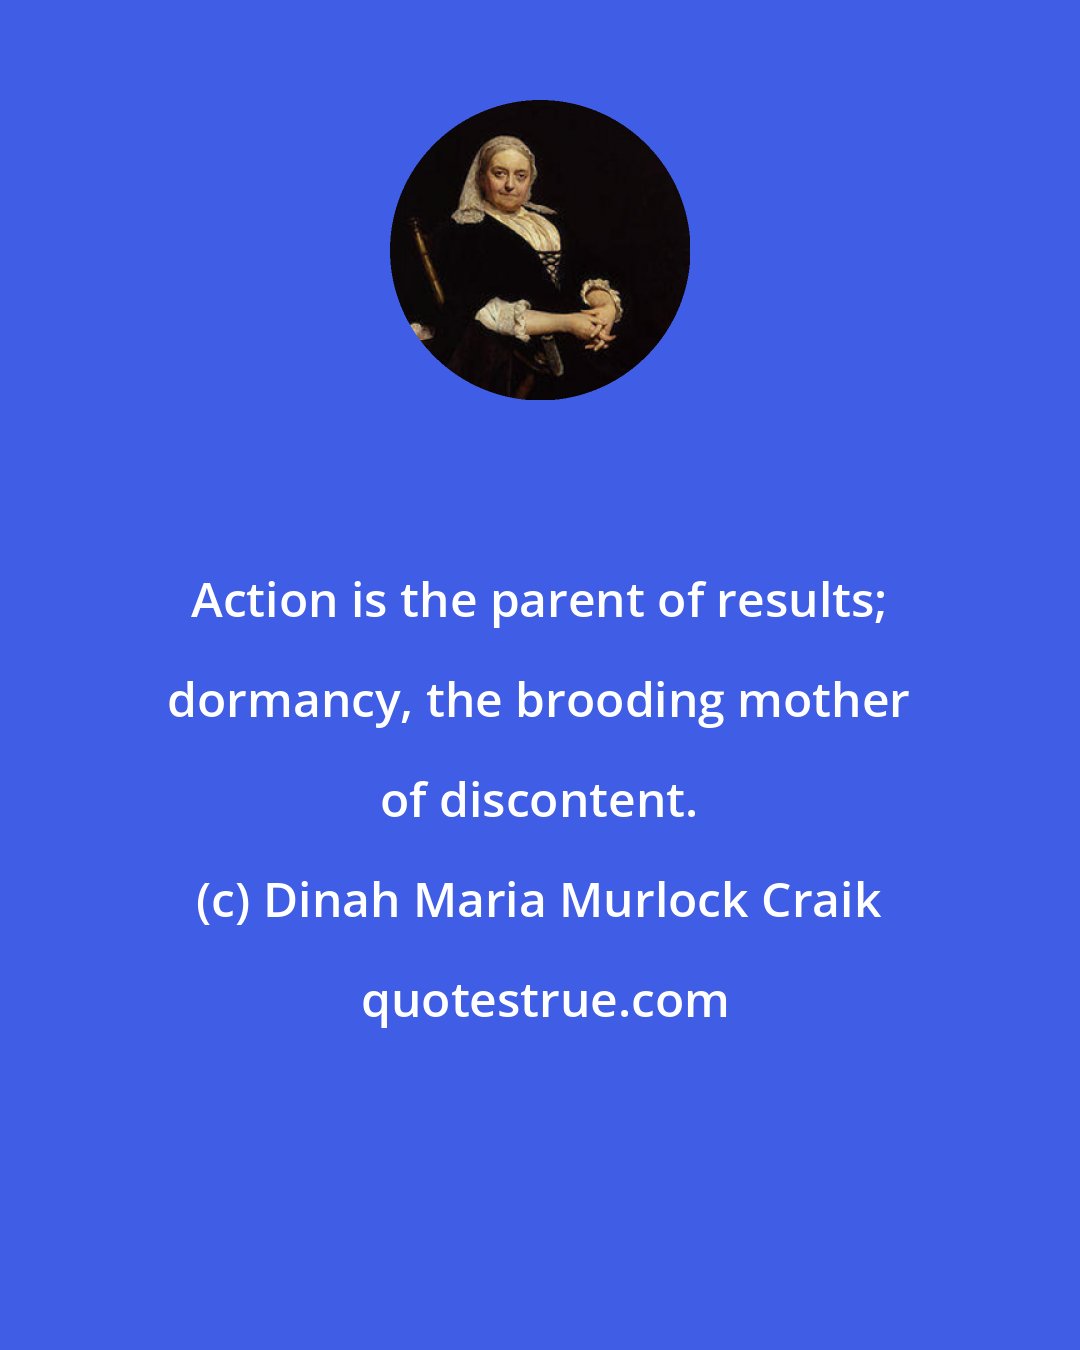 Dinah Maria Murlock Craik: Action is the parent of results; dormancy, the brooding mother of discontent.